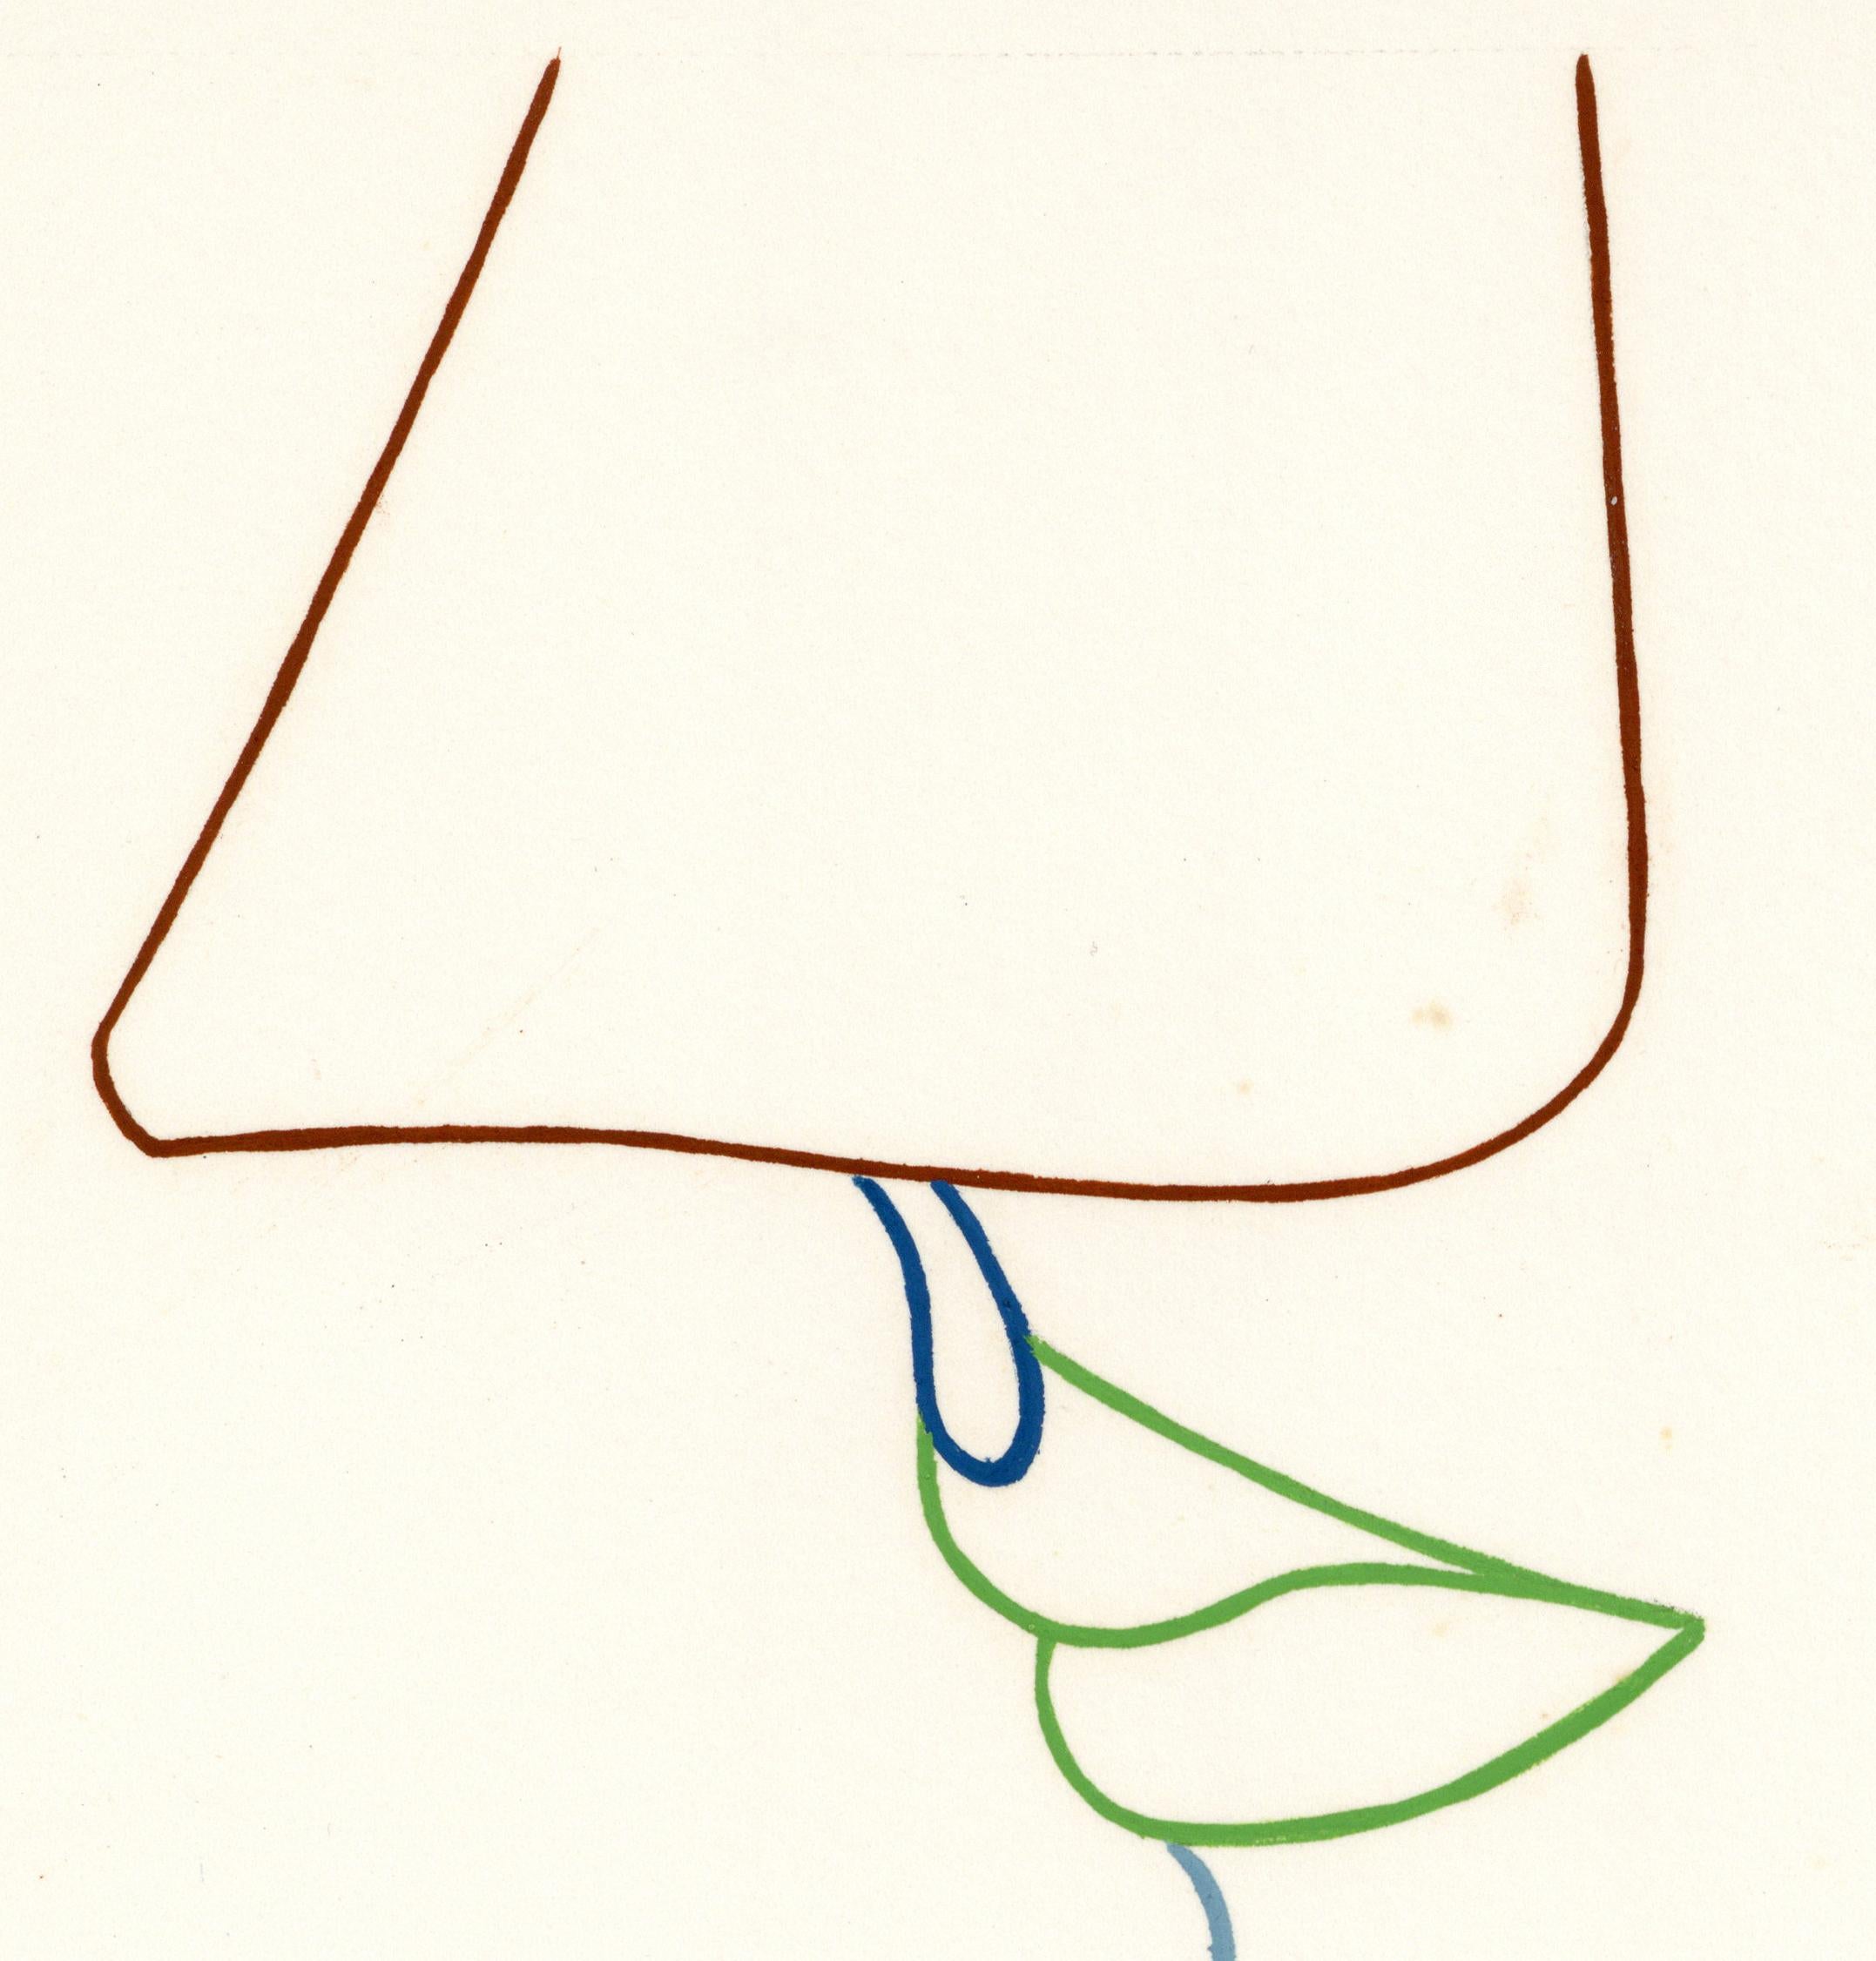 Linda Stein,  Profile Solid 383.063 - Signed Feminist LGBTQ+ Acrylic and Goauche on Paper Drawing 

Profile Solid 383.063 is from Linda Stein's Profiles series--drawings, collages and paintings of facial profiles she made in the 1960s and 1970s when